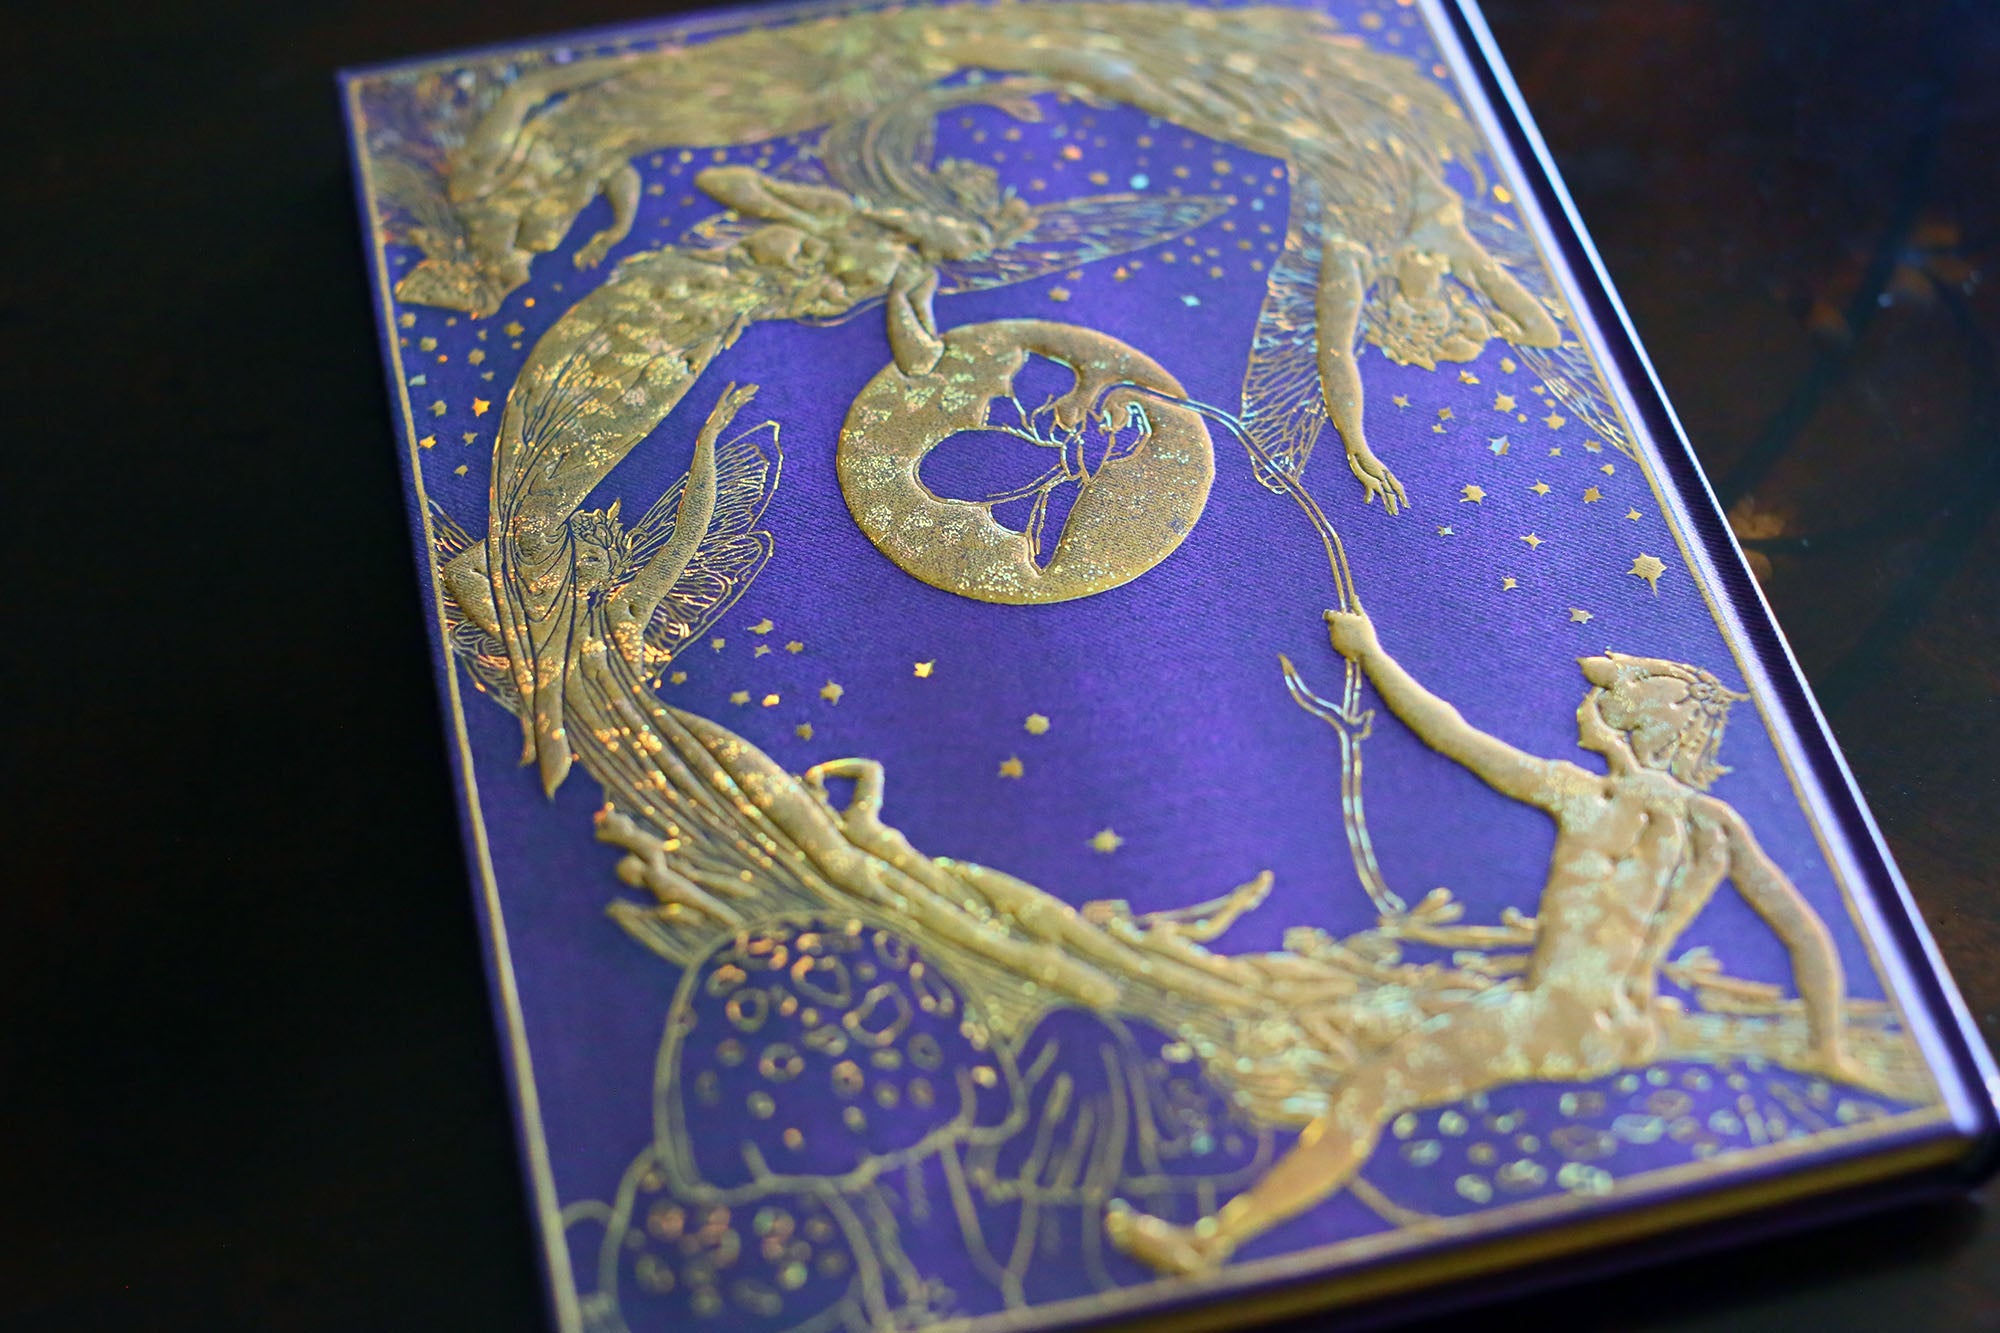 Violet Fairy, Lang's Fairy Book Limited Edition, Journal with Gilt Accents, Lined, Paperblanks, 7in x 5in